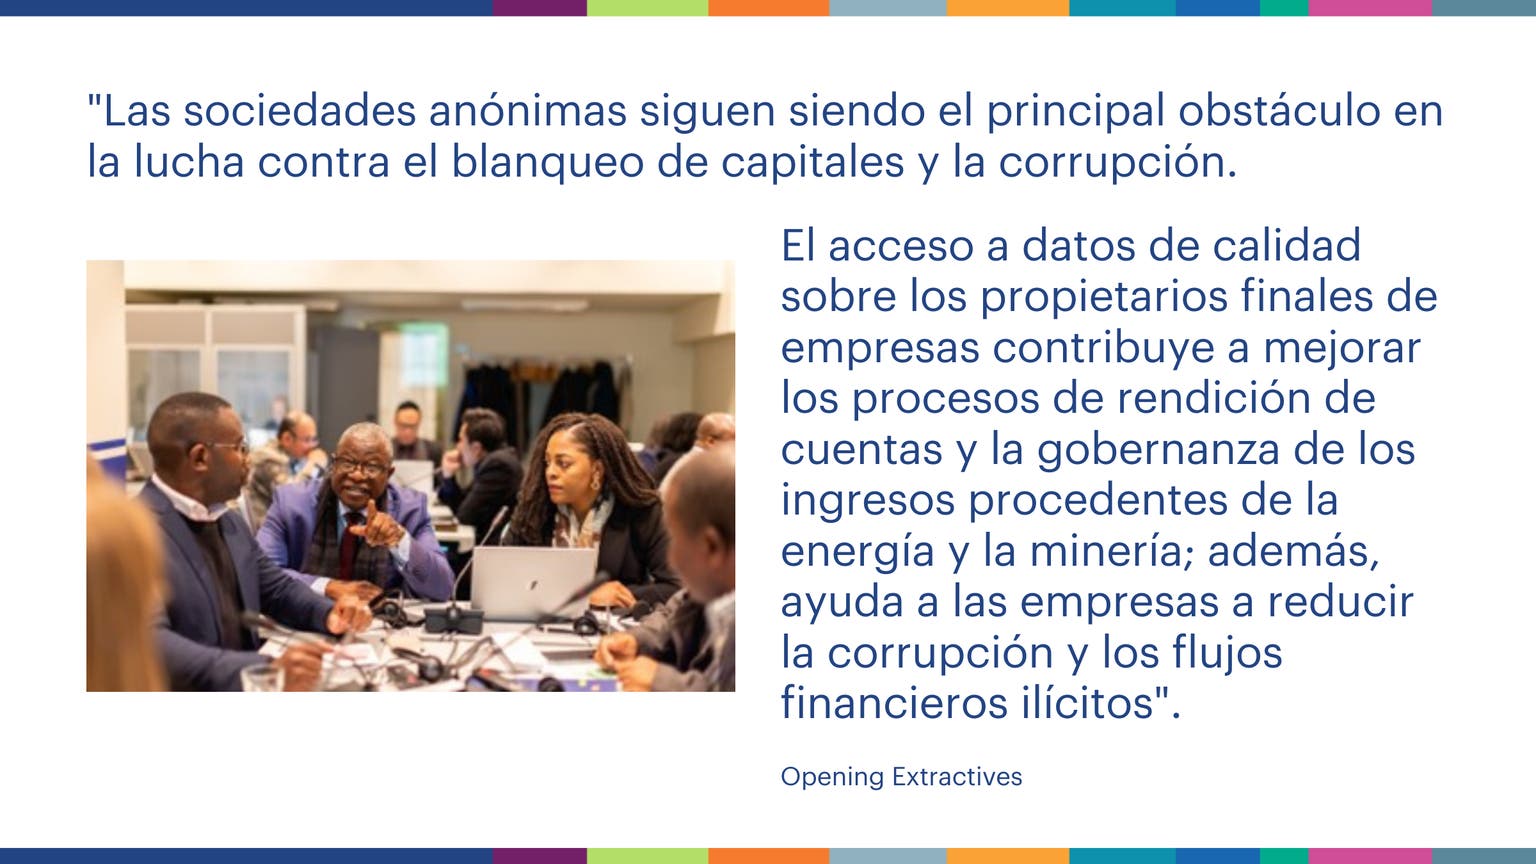 Opening_Extractives_Oxford_evaluation_OE_quote_Spanish.png